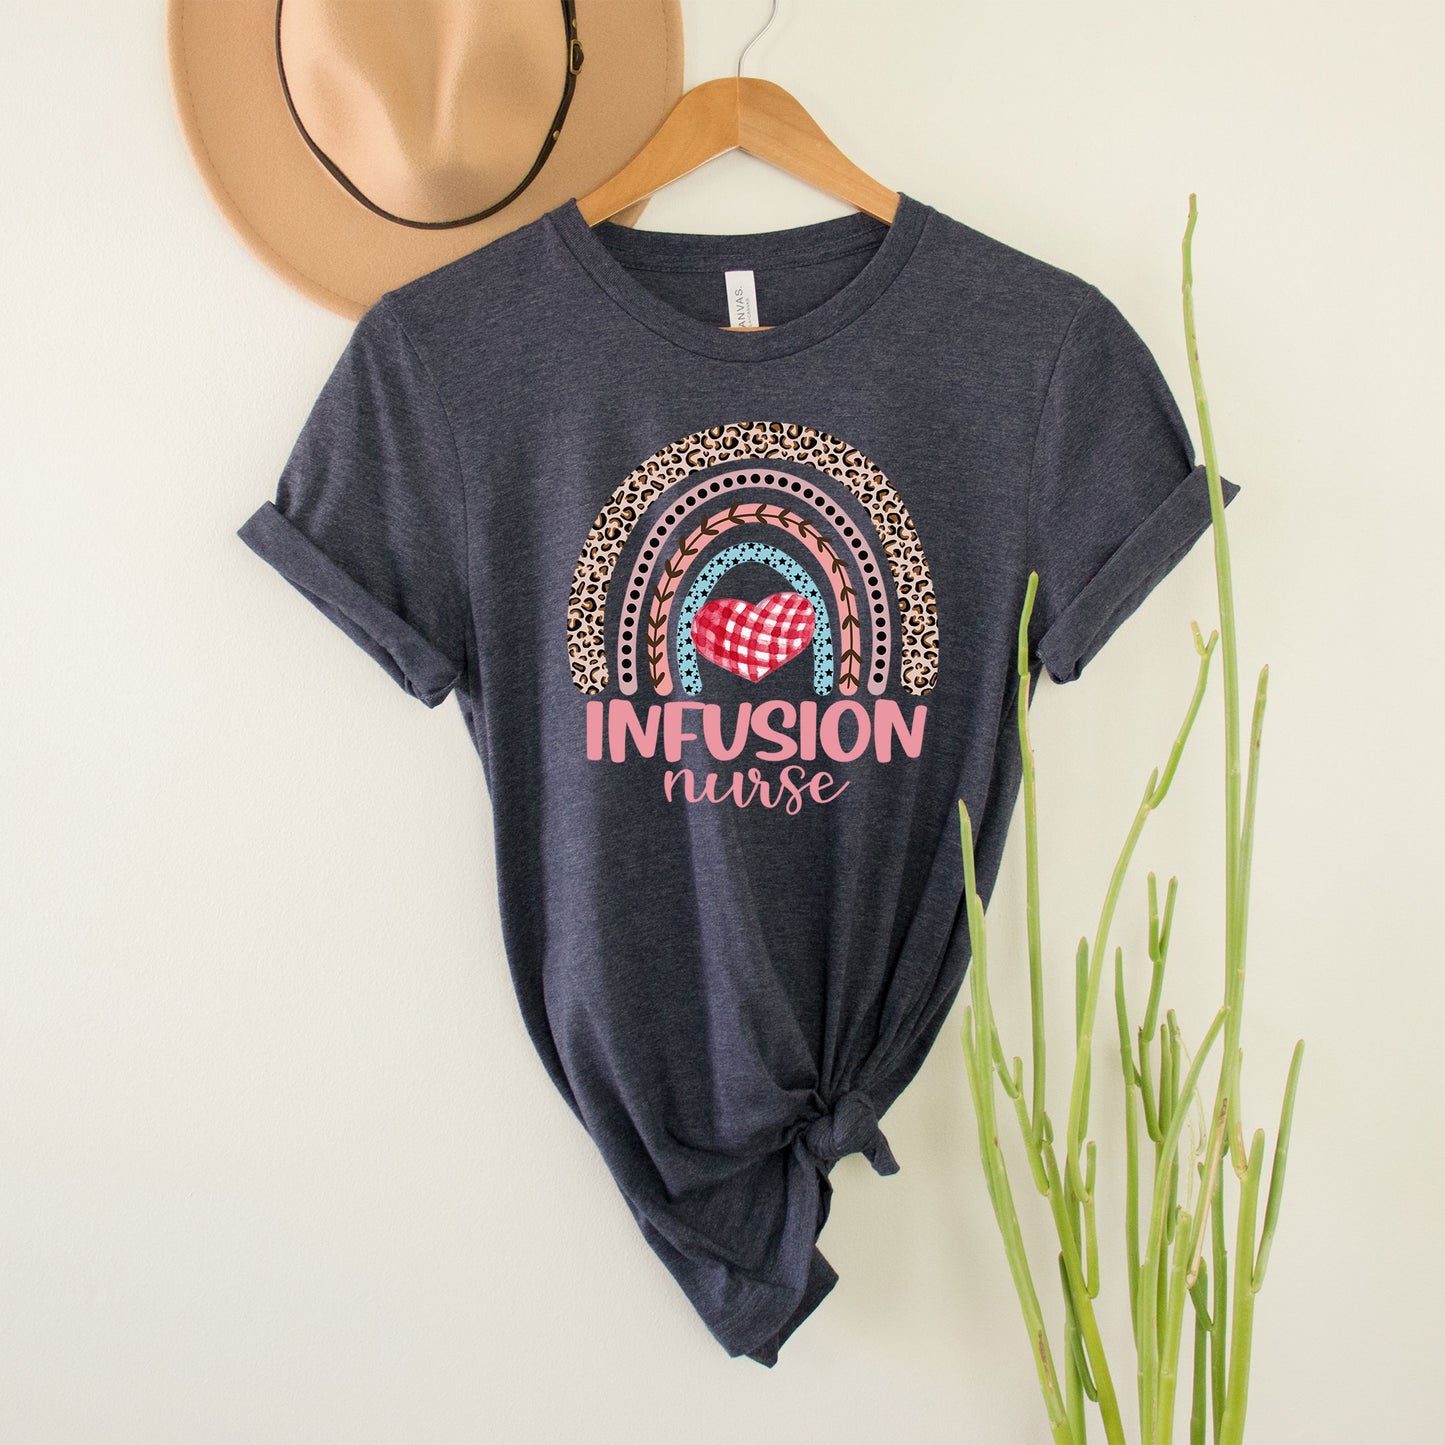 Infusion Nurse, Infusion Day Shirt, Infusion Therapy Chemotherapy Nursing School Grad Tee POTS Autoimmune Disease Infusion Gift Bday